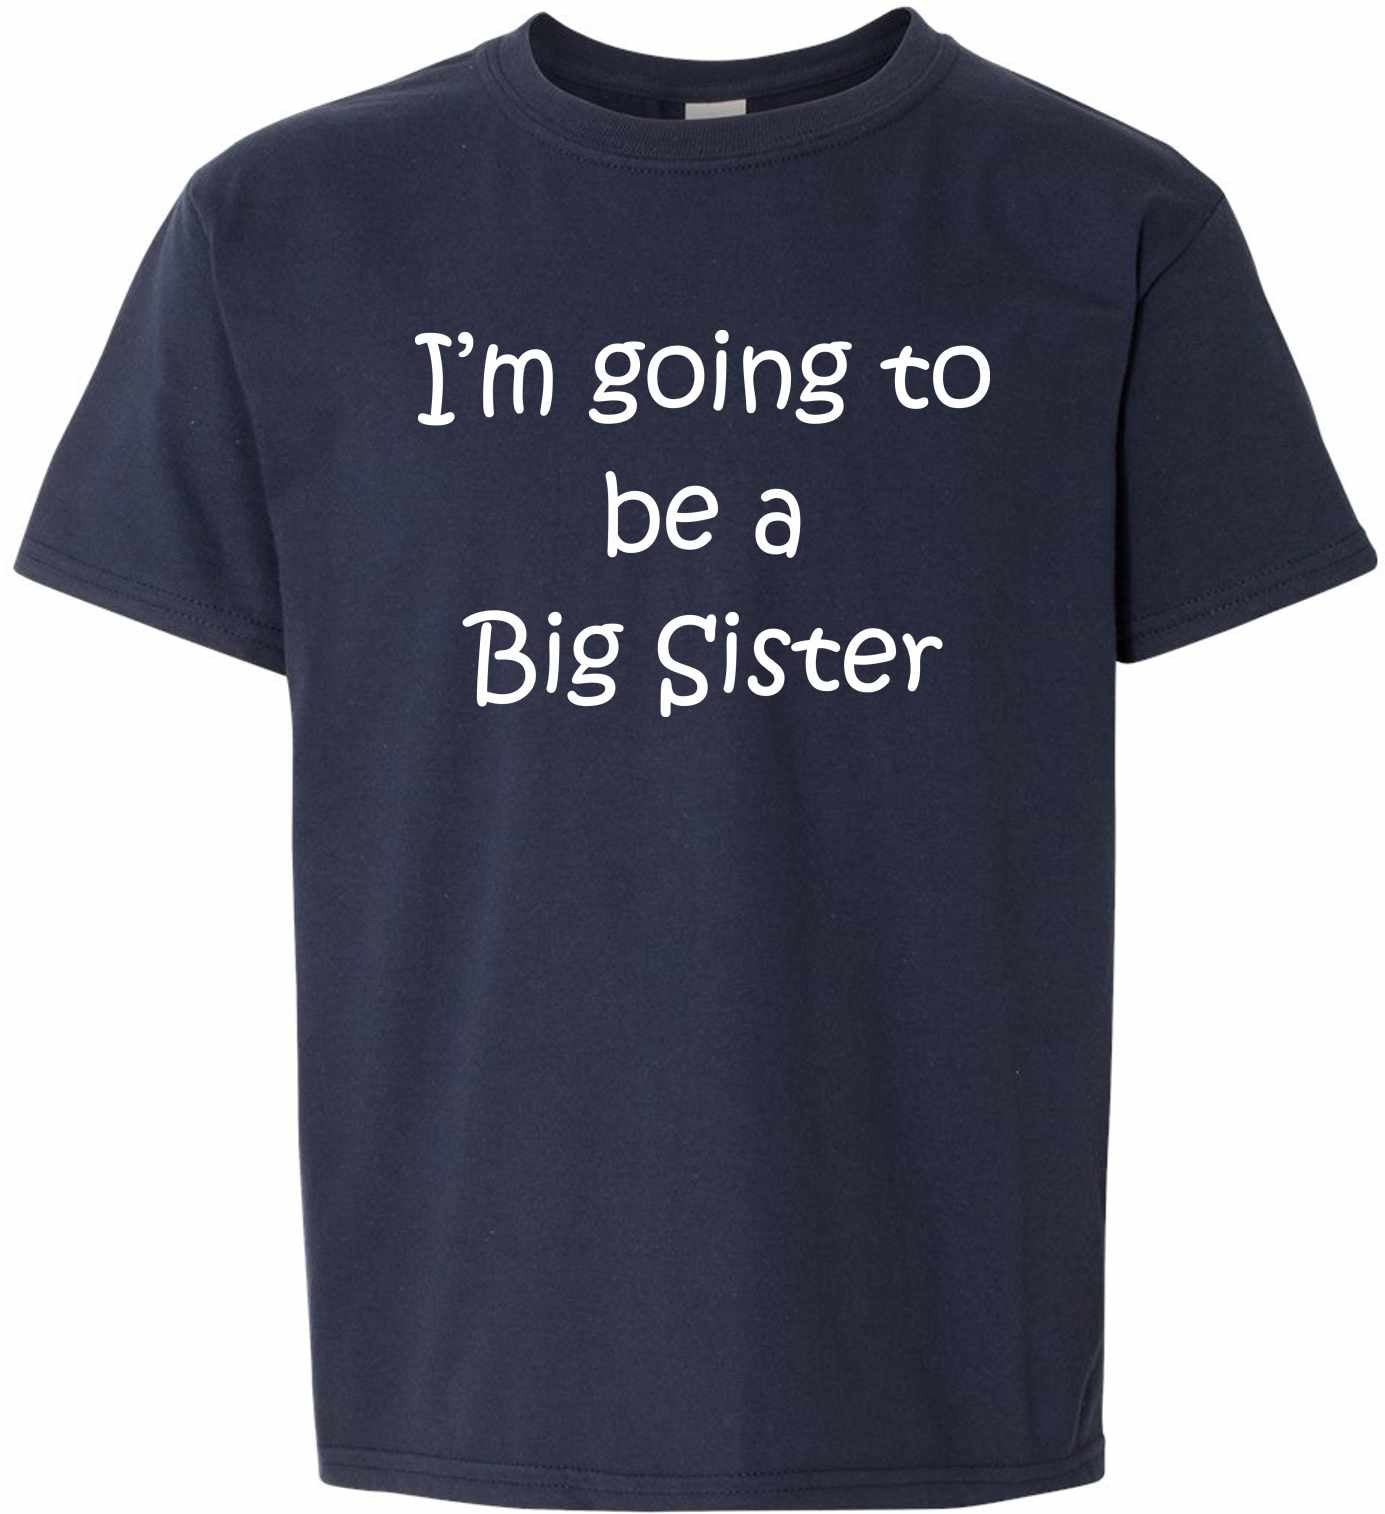 I'M GOING TO BE A BIG SISTER on Kids T-Shirt (#587-201)